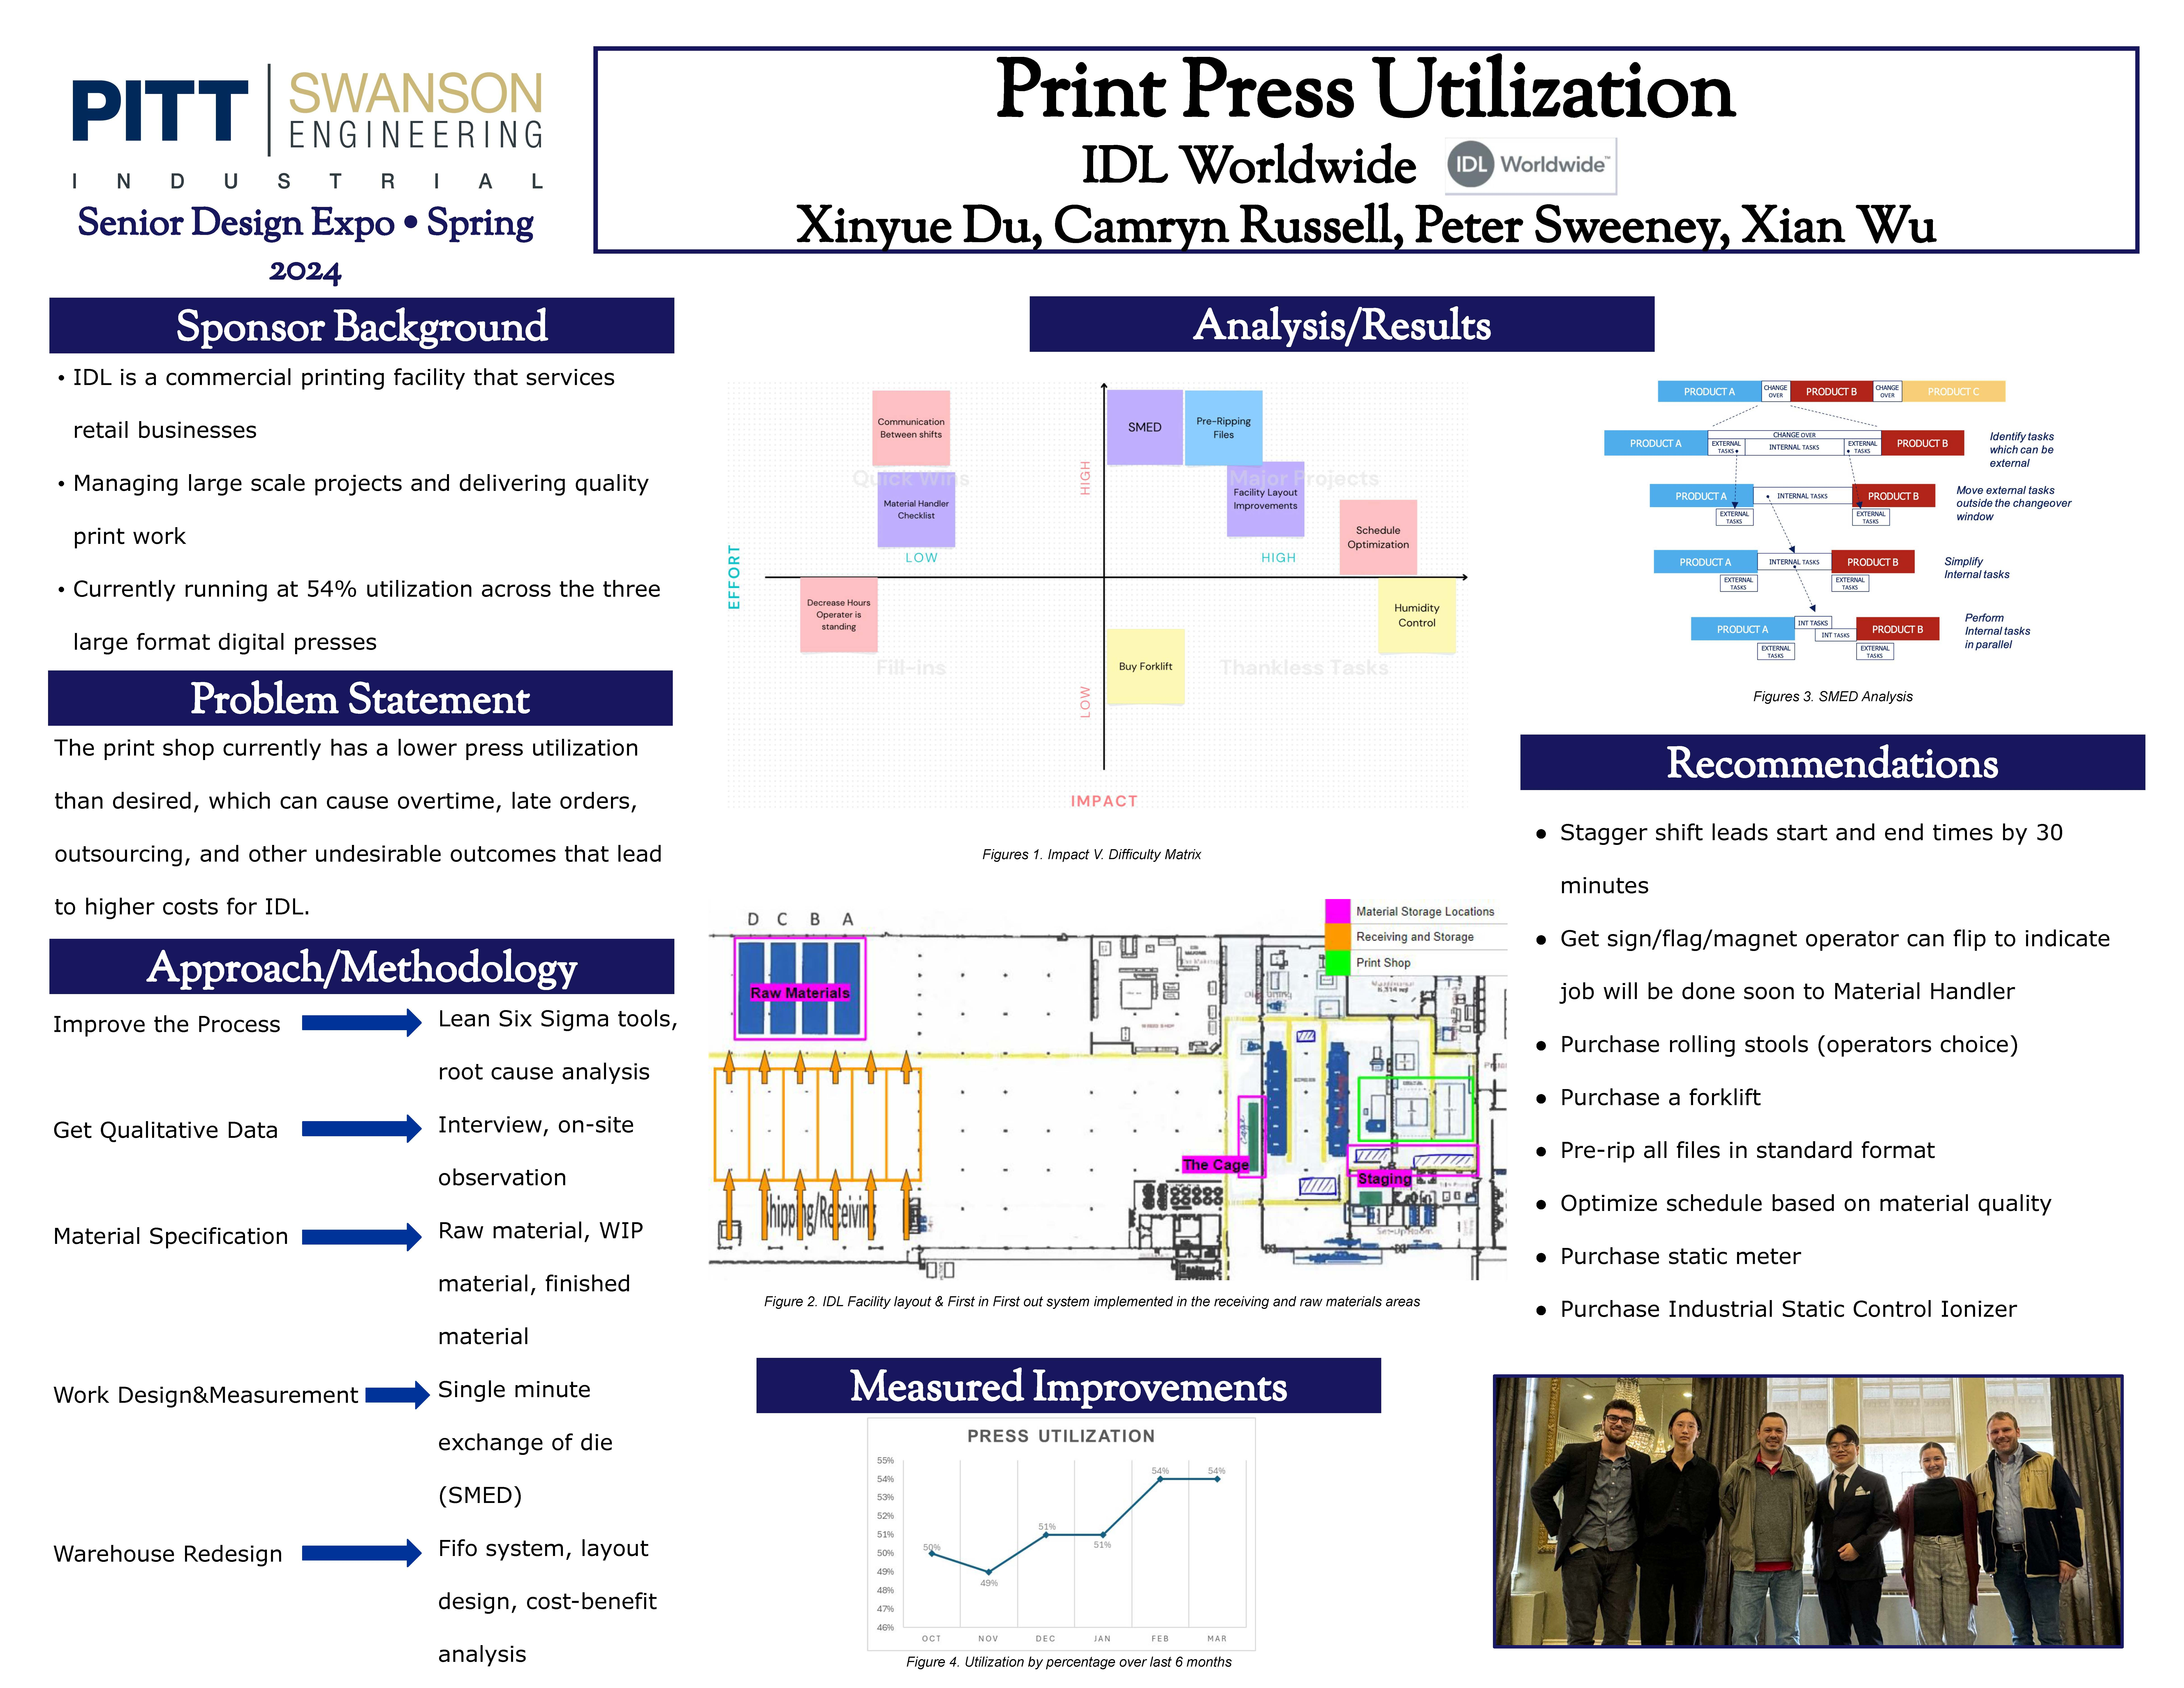 Print Press Utilization with IDL Worldwide, research poster showing the project's overview